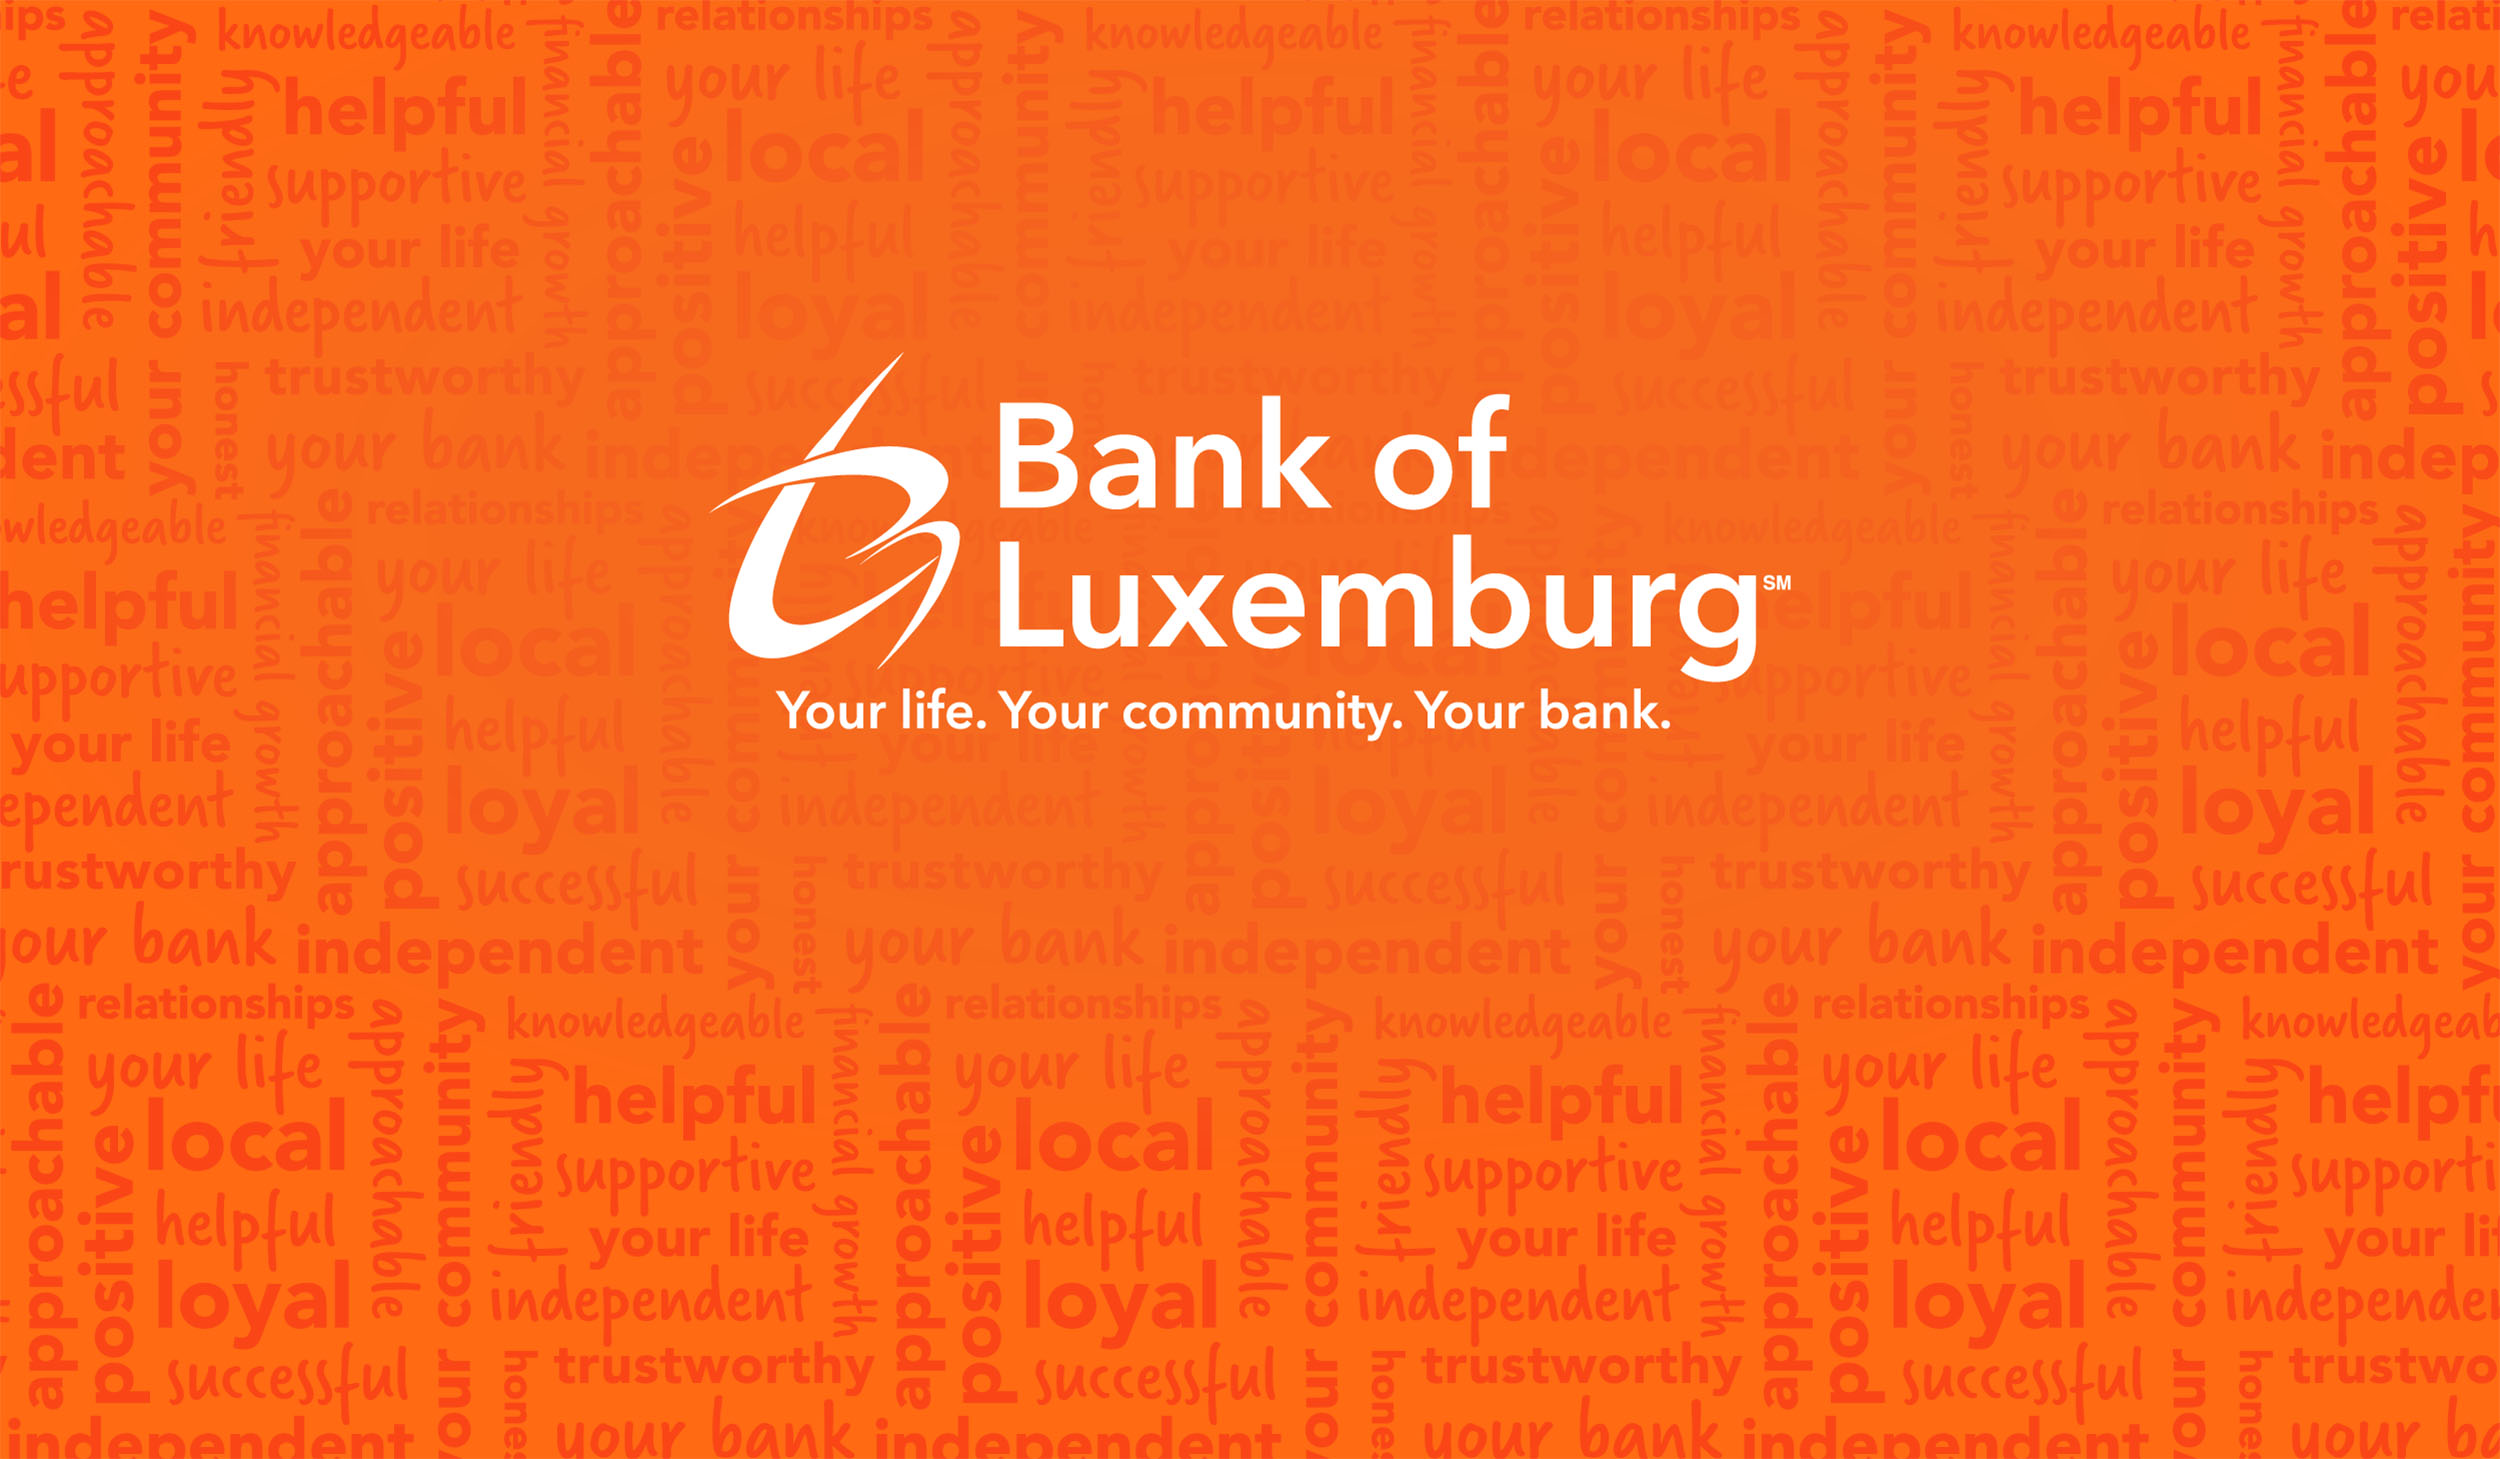 Bank of Luxemburg Project cover